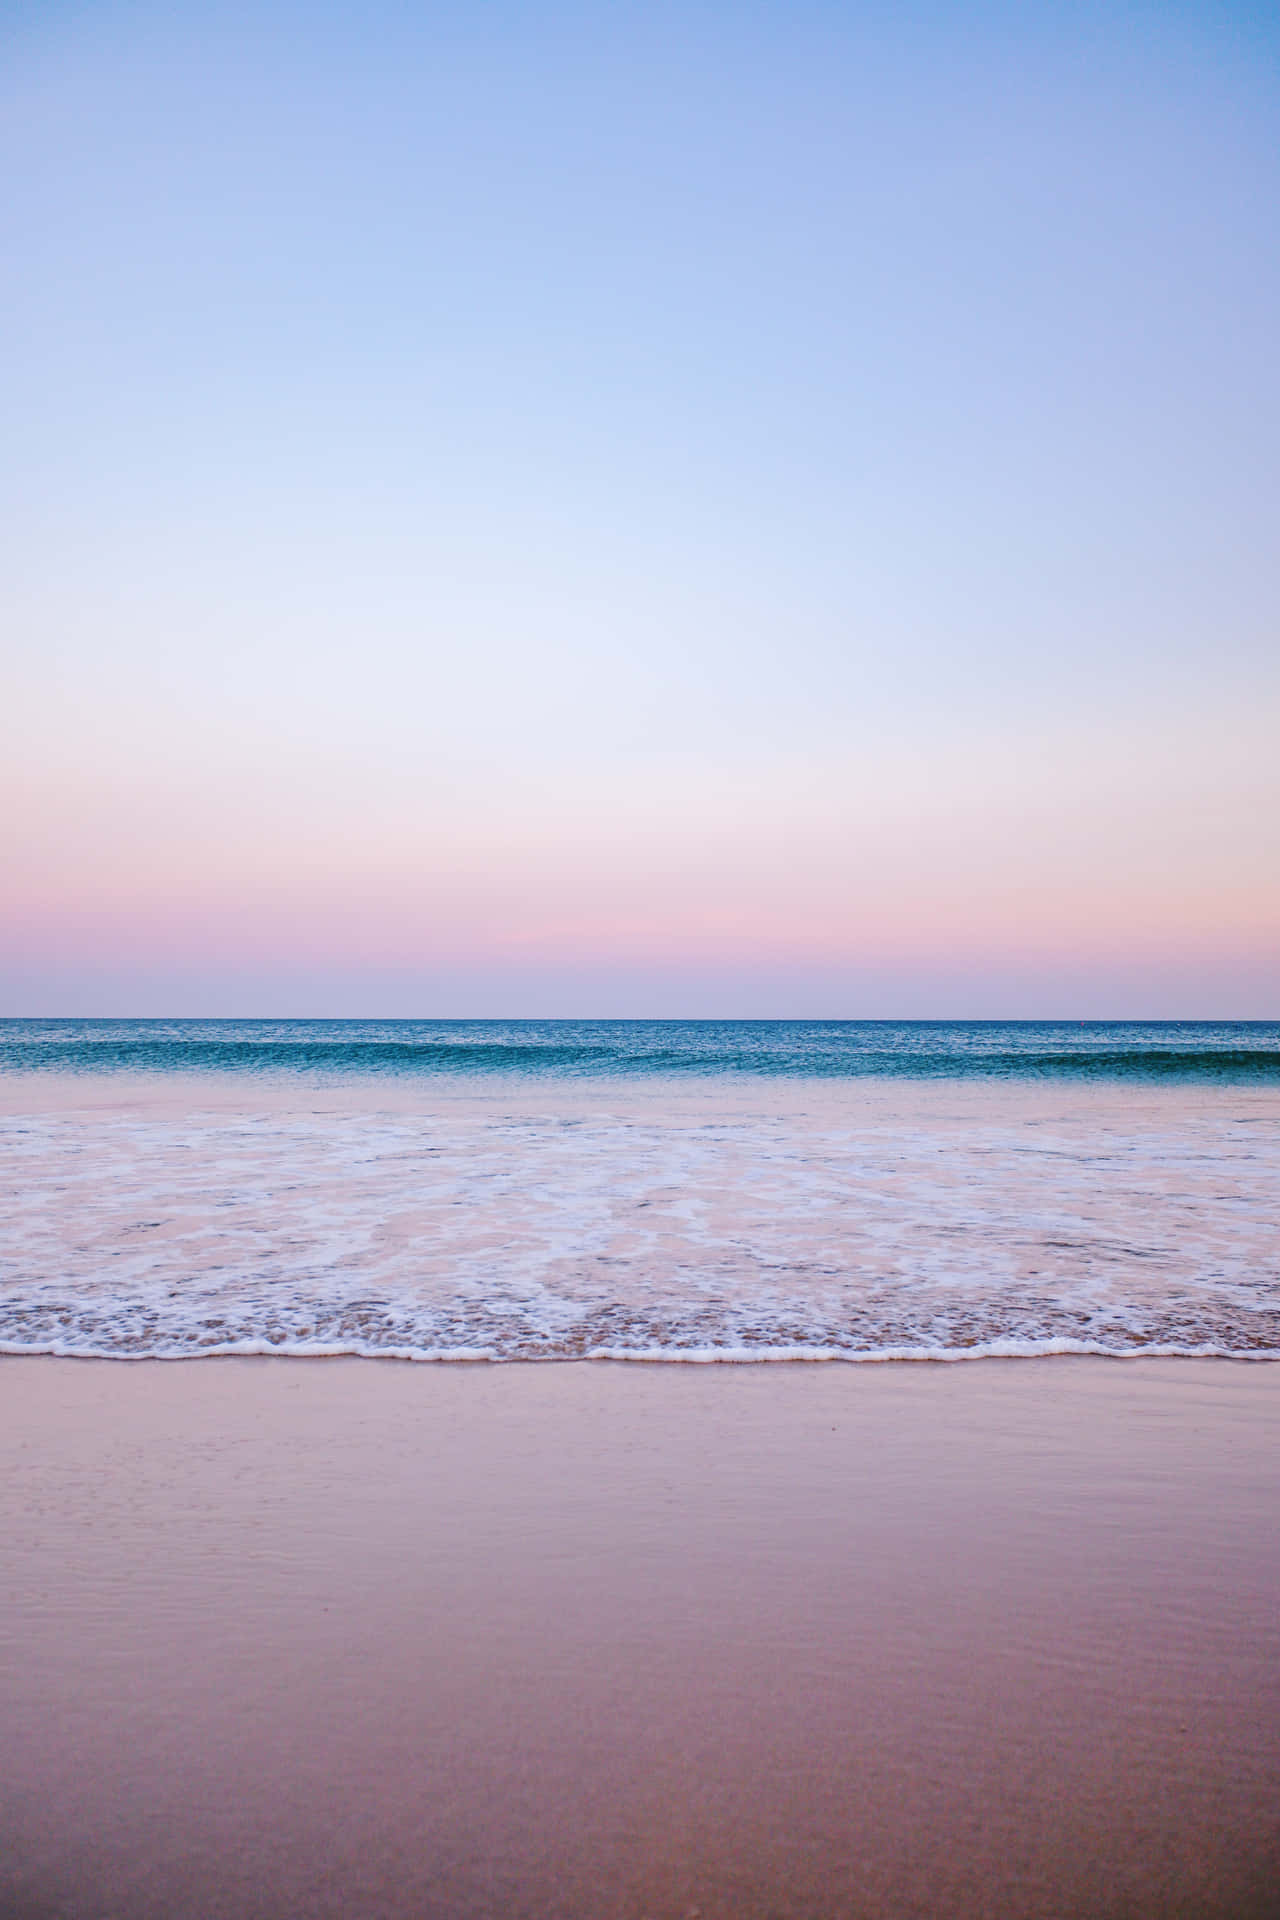 Enjoy a blissful day of rest and relaxation at the tranquil pastel beach. Wallpaper